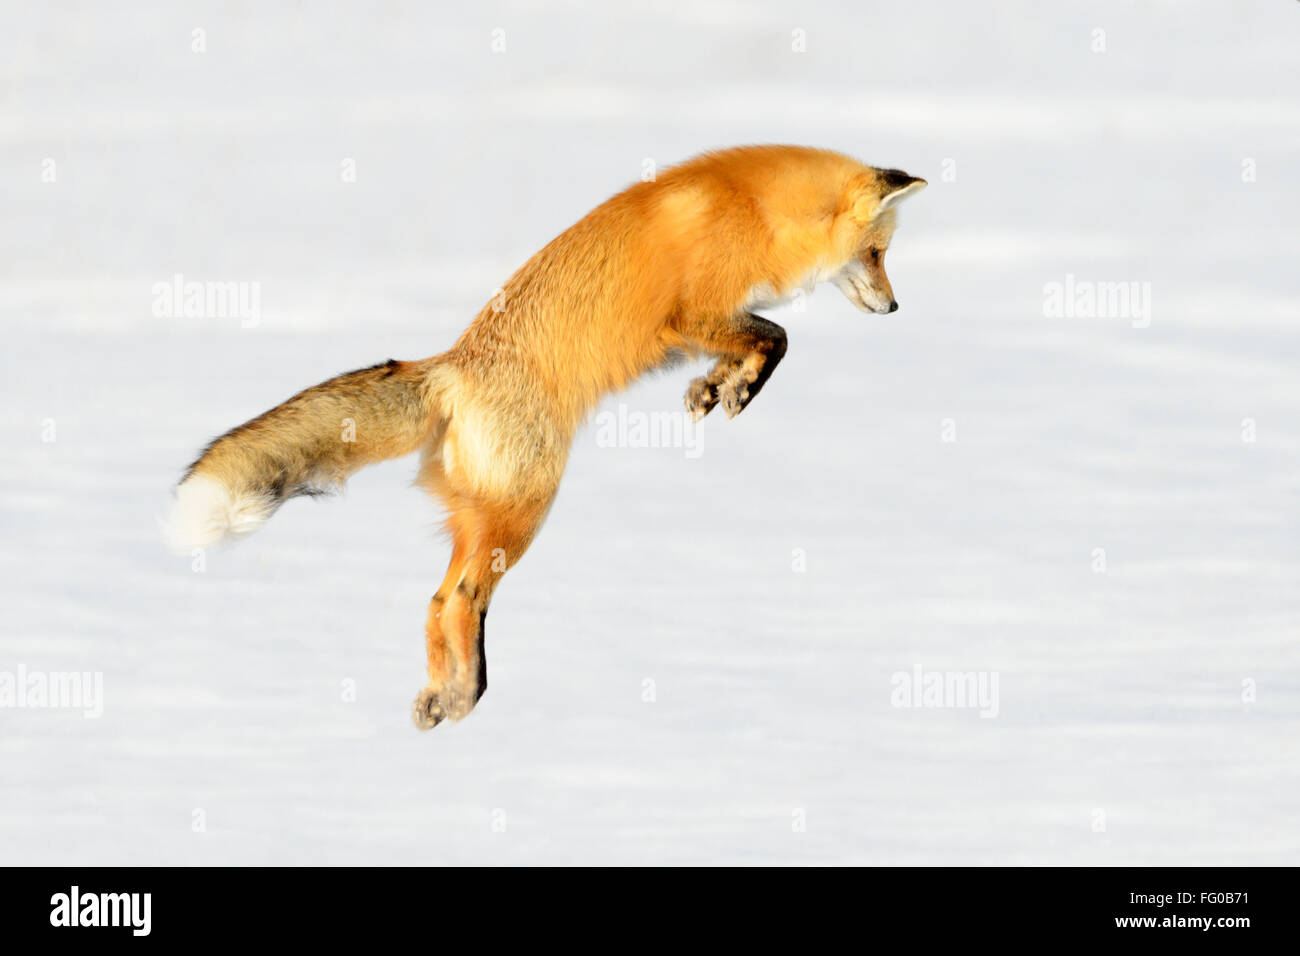 American Red Fox (Vulpes vulpes fulva) adult, hunting, jumping on prey in snow, Yellowstone national park, Wyoming, USA. Stock Photo